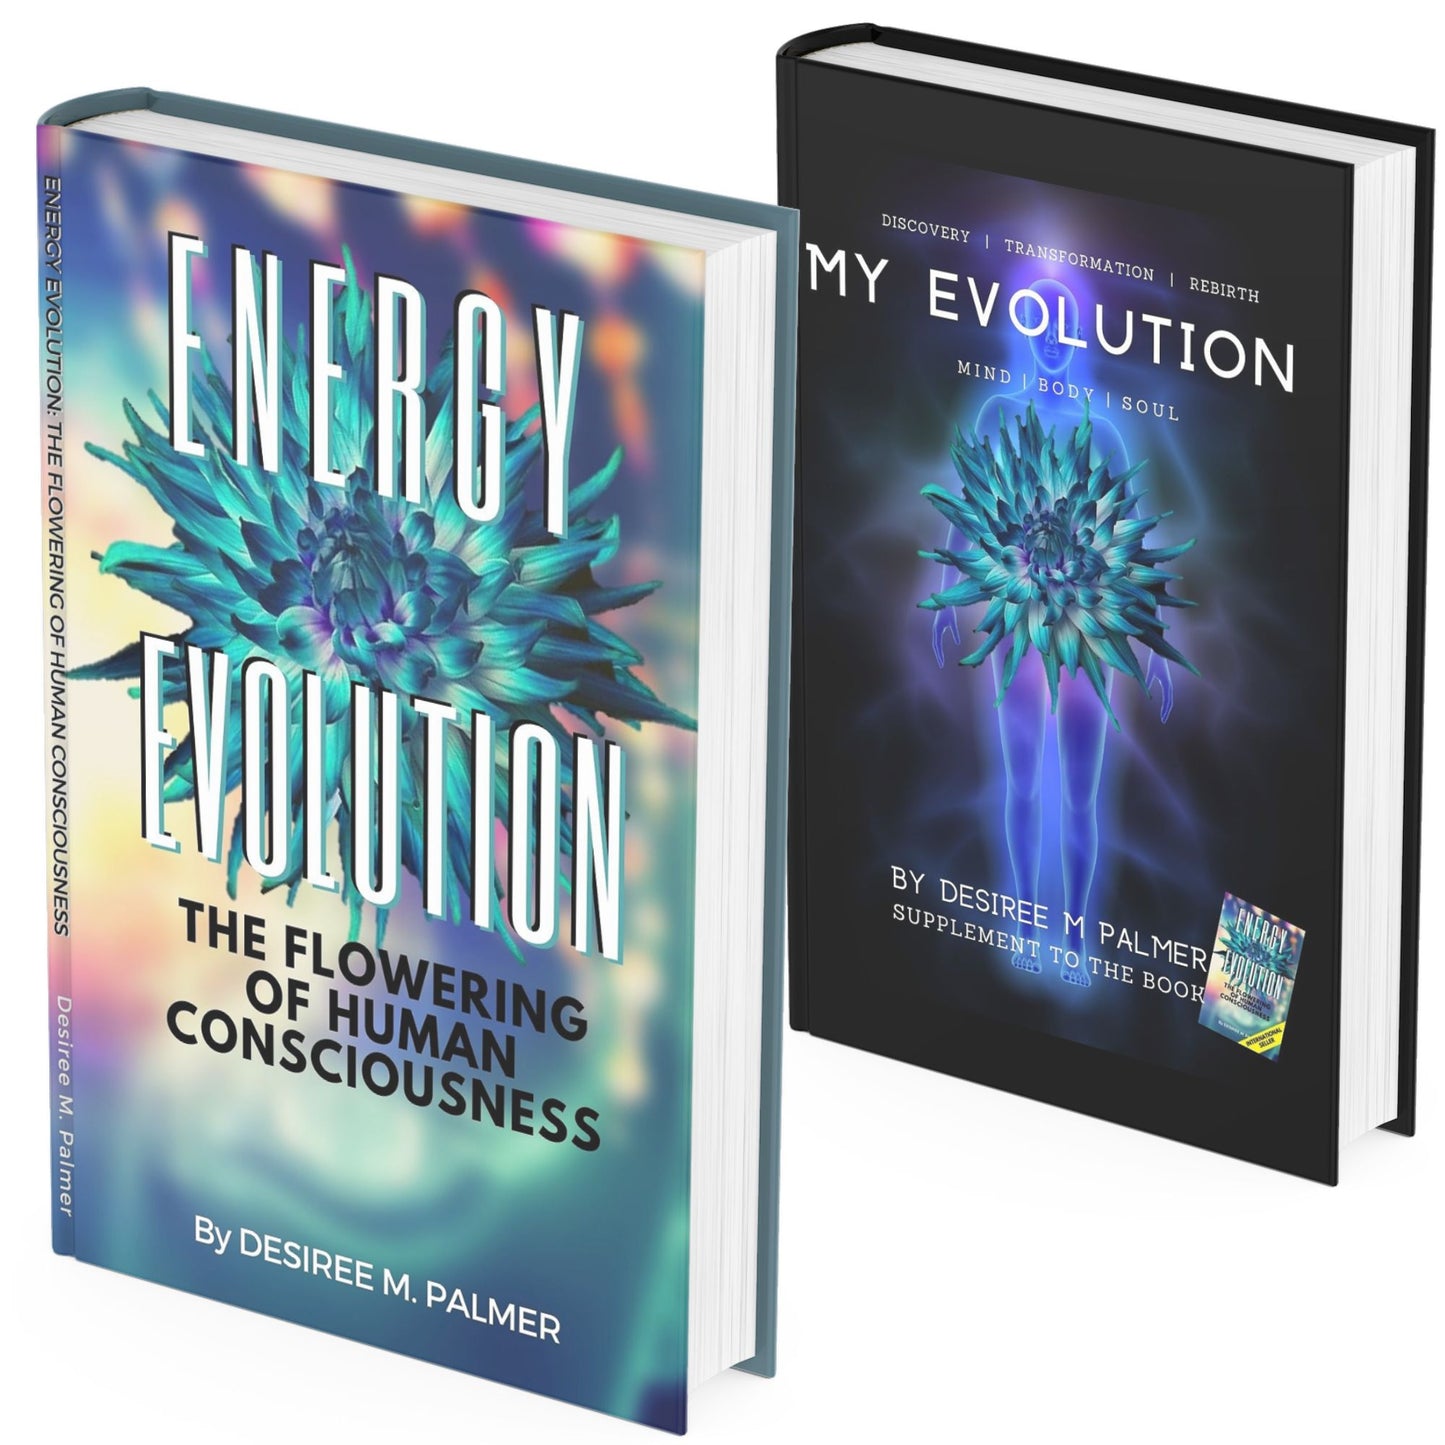 Energy Evolution - The Flowering of Human Consciousness